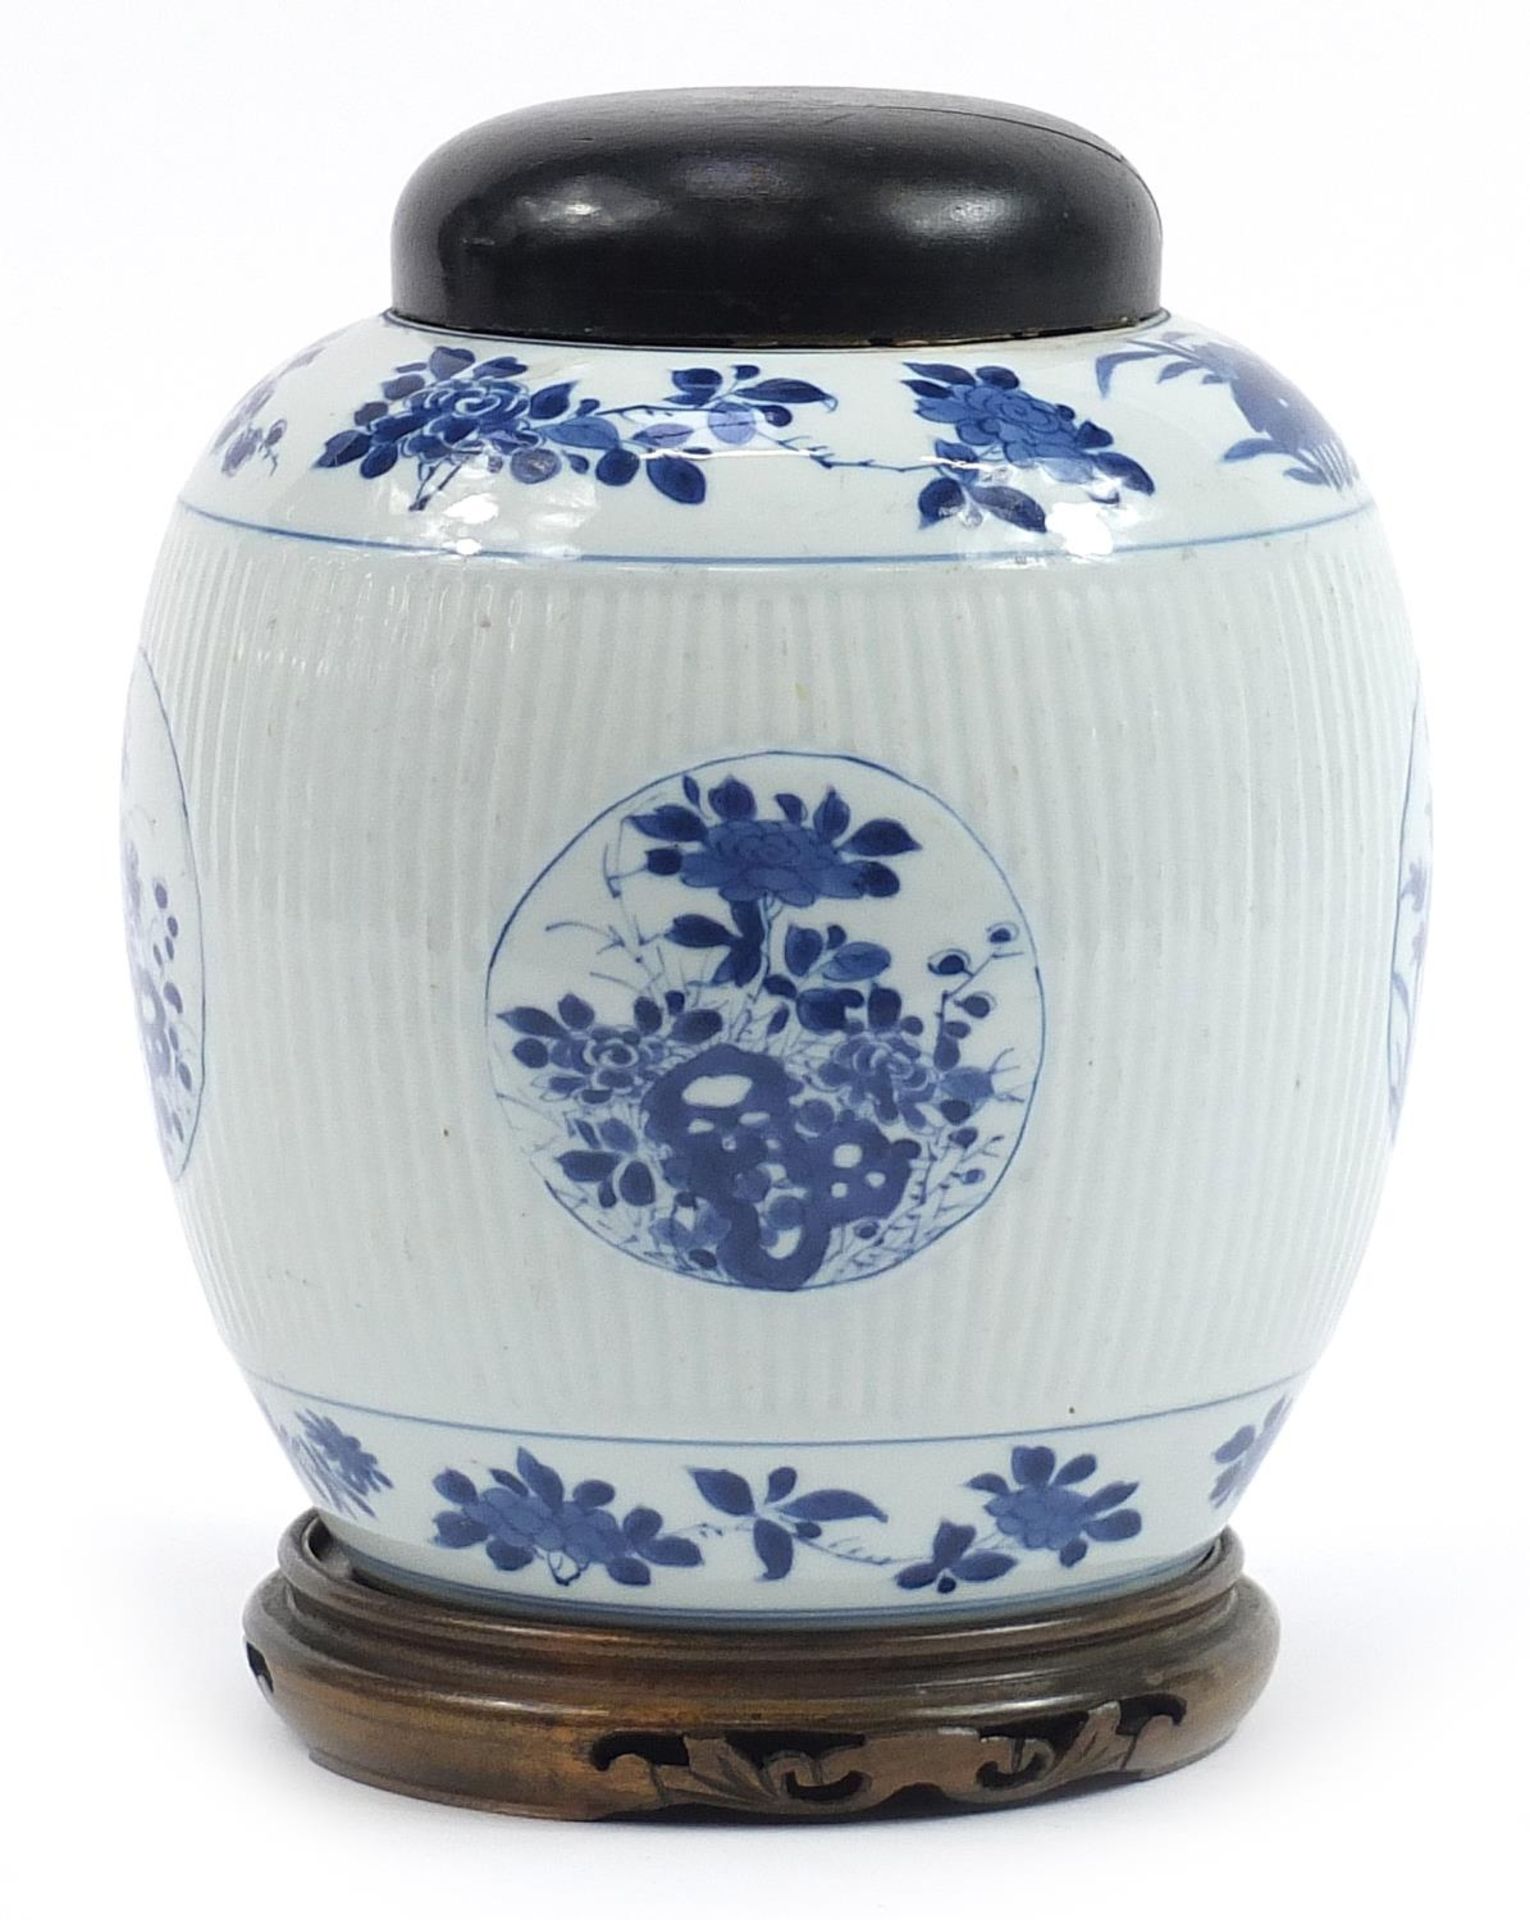 Chinese blue and white porcelain ribbed jar with cover raised on hardwood stand, hand painted with